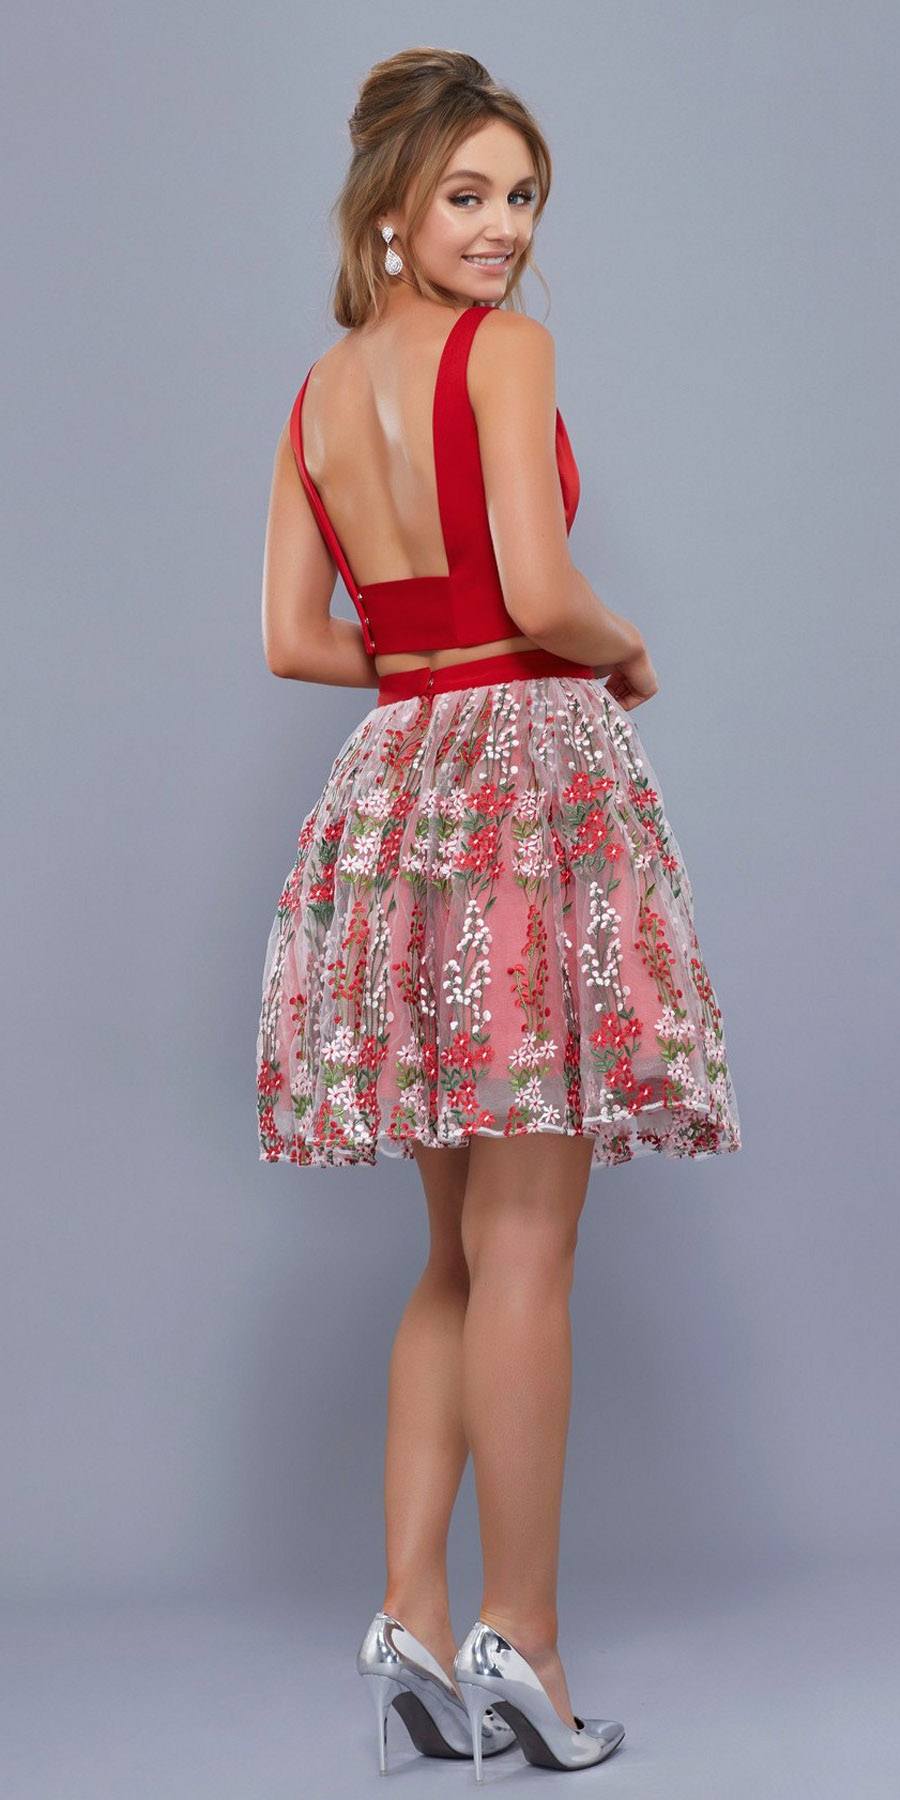 Red Embroidered Skirt Two-Piece Homecoming Dress Cut Out Back